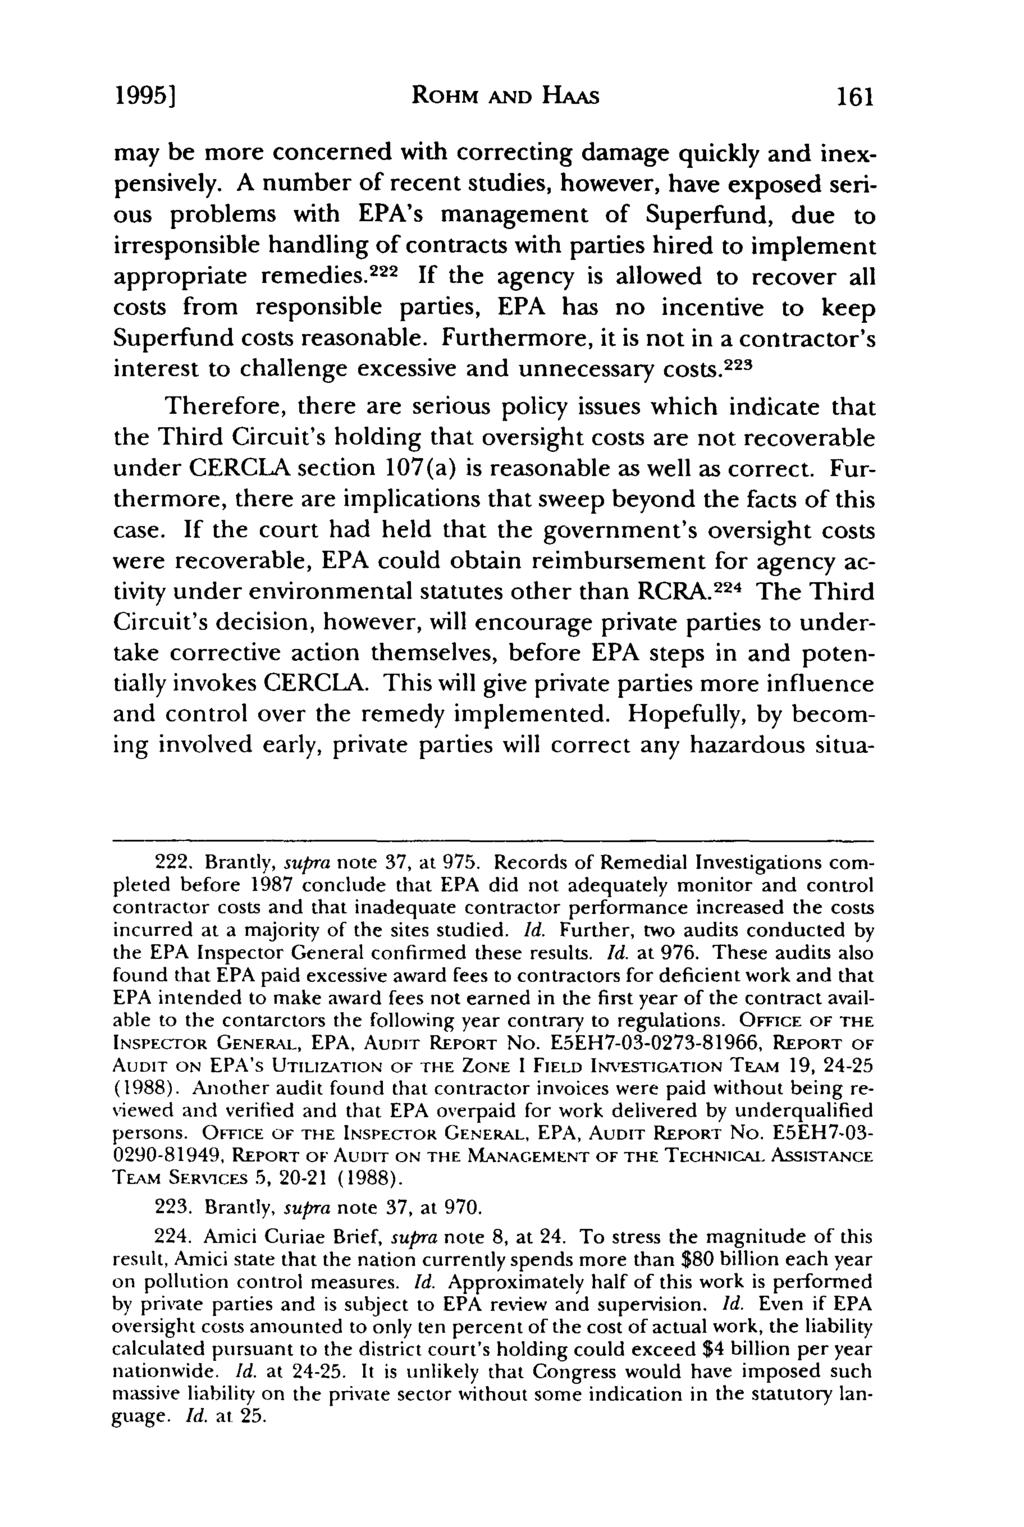 19951 Aberbach: Recoverability of Government Oversight Costs under CERCLA Section ROHM AND HAAS may be more concerned with correcting damage quickly and inexpensively.